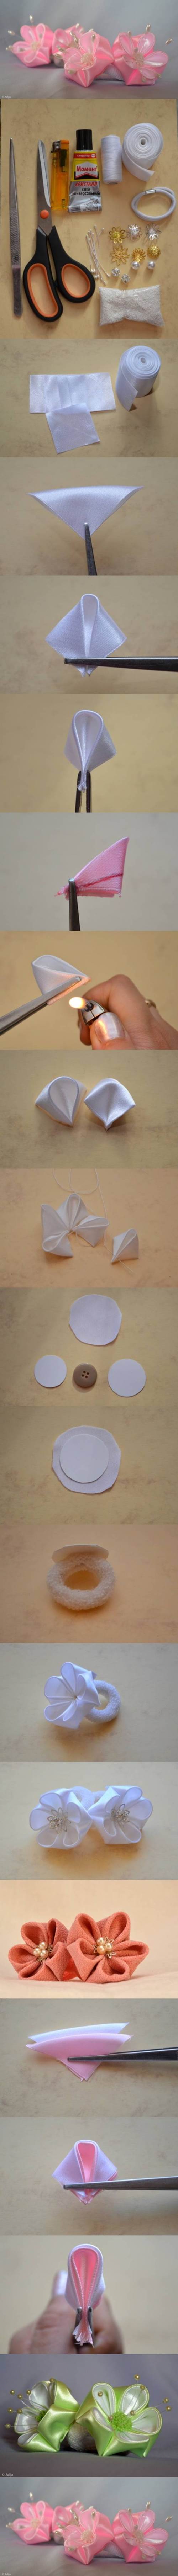 How to DIY Round Petals Ribbon Flower 1